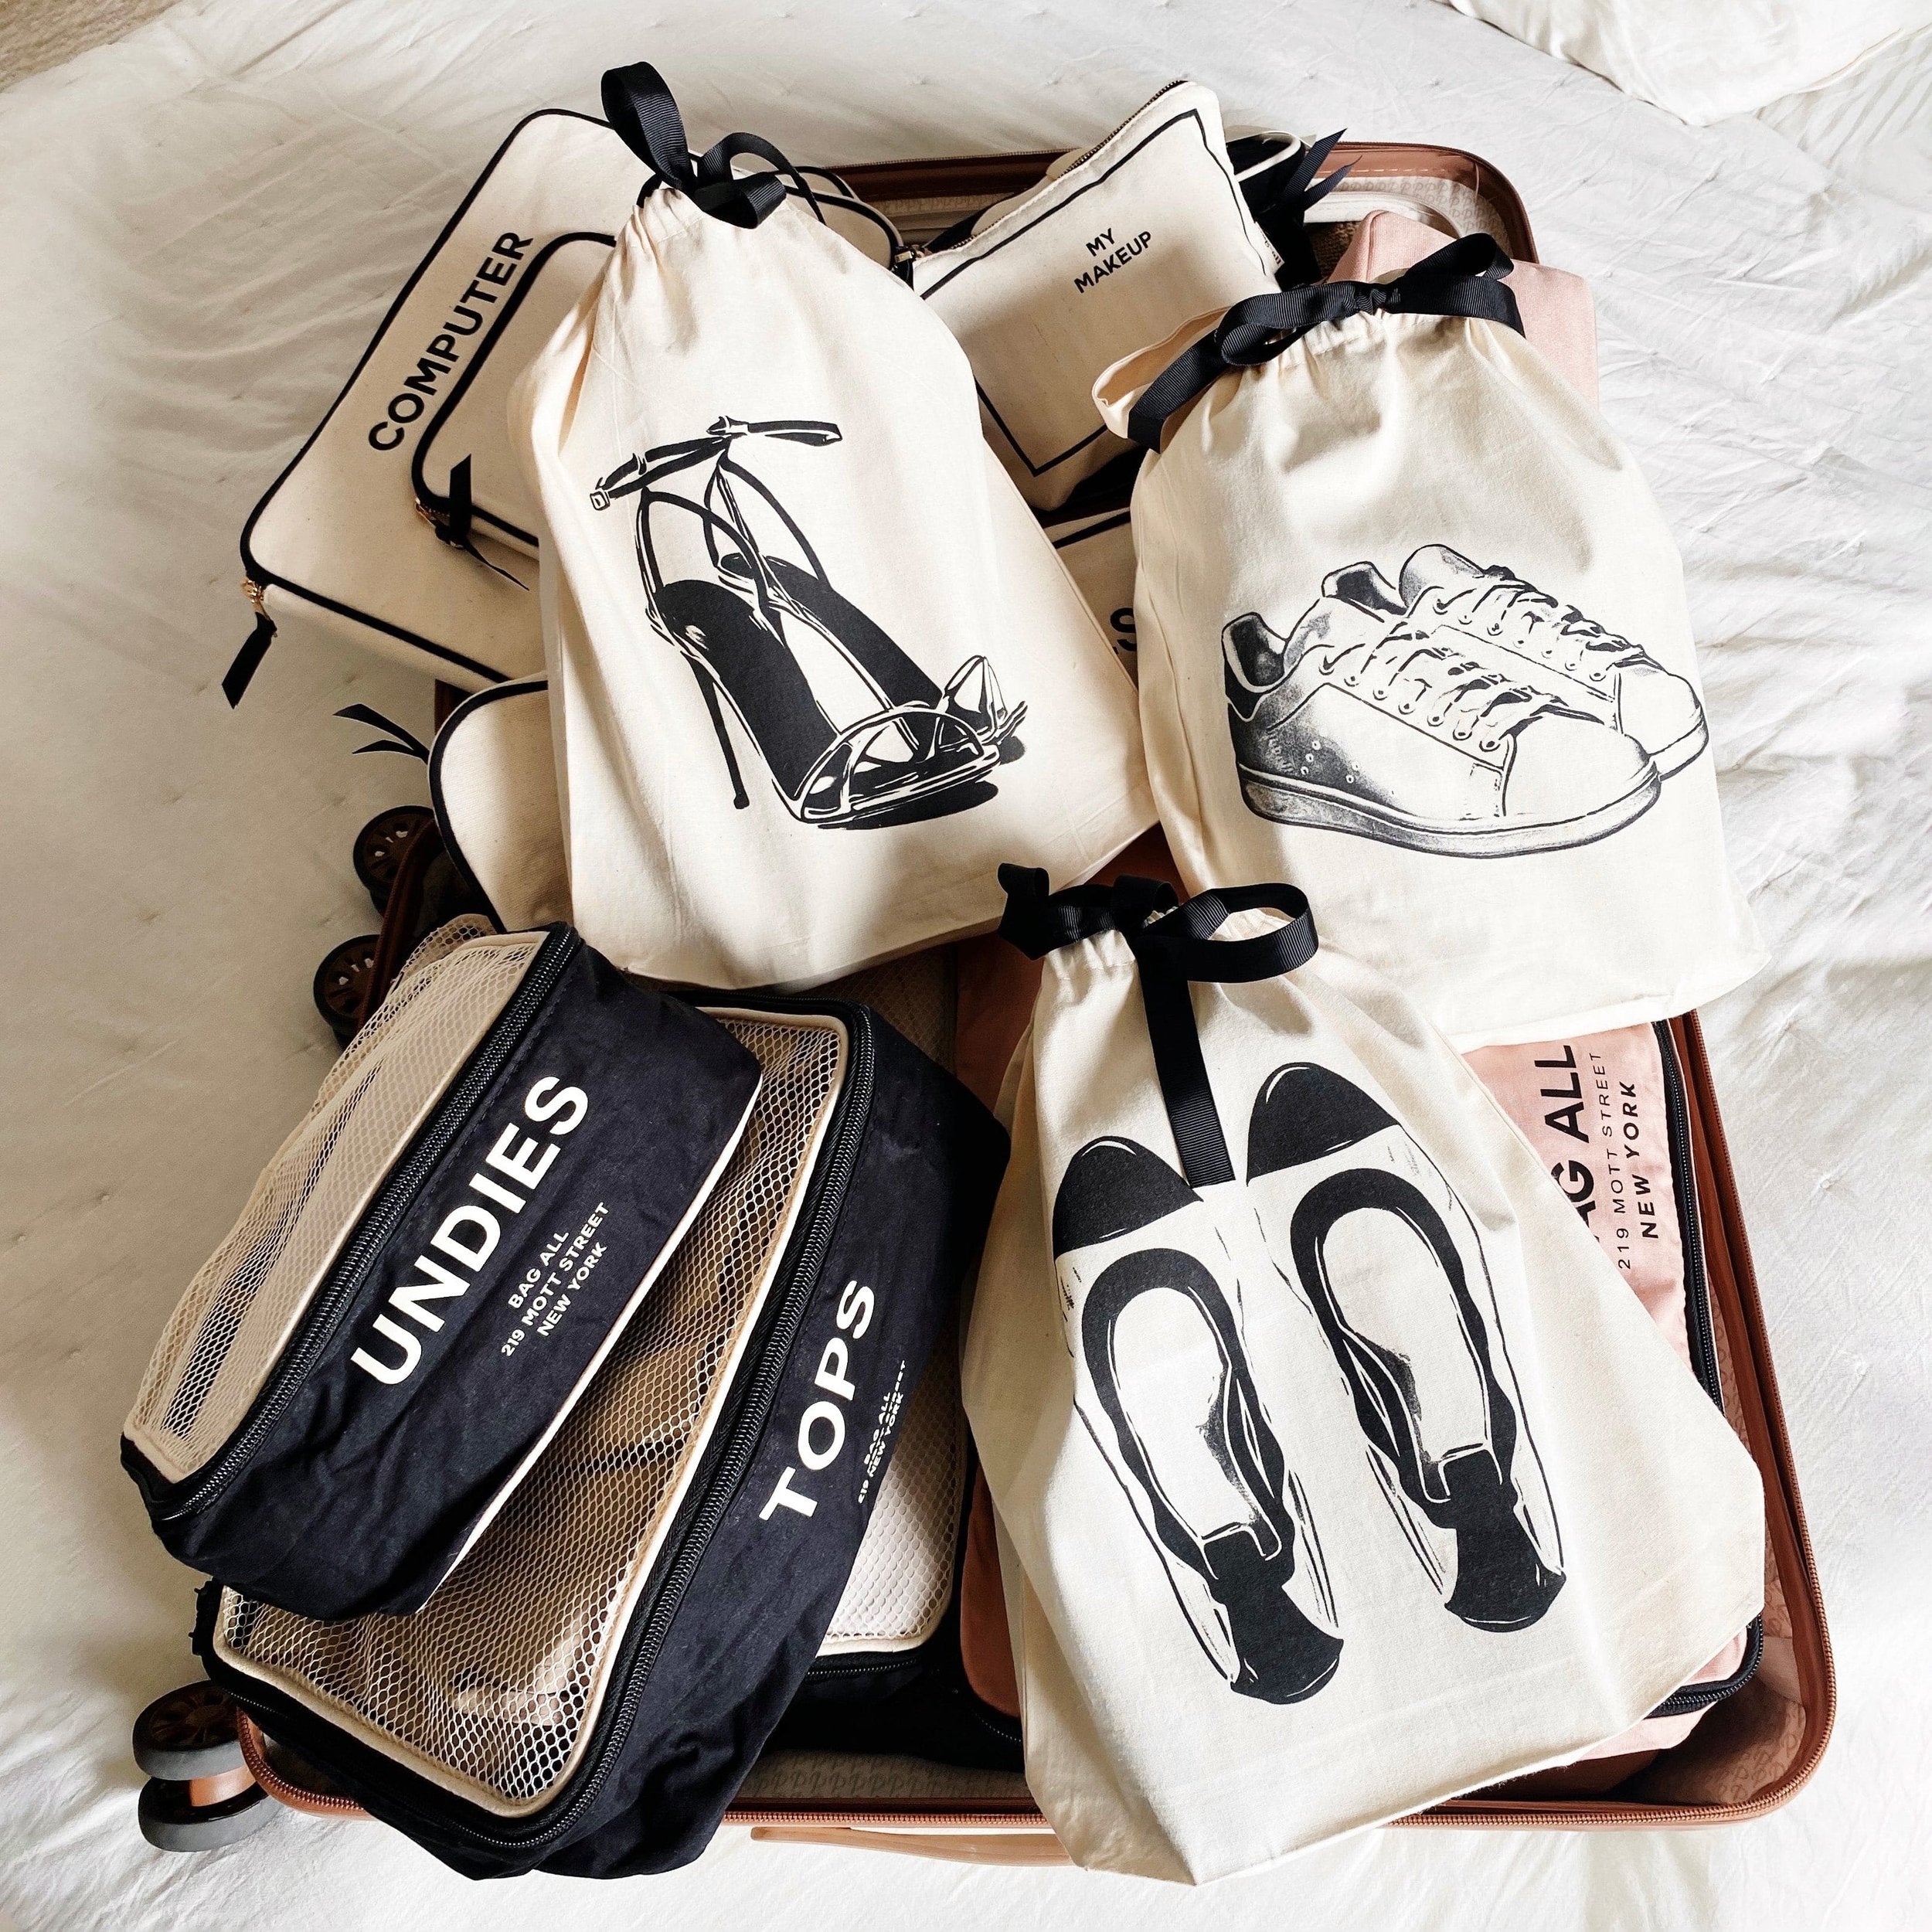 Why Travel Shoe Bag Are a Packing Essential